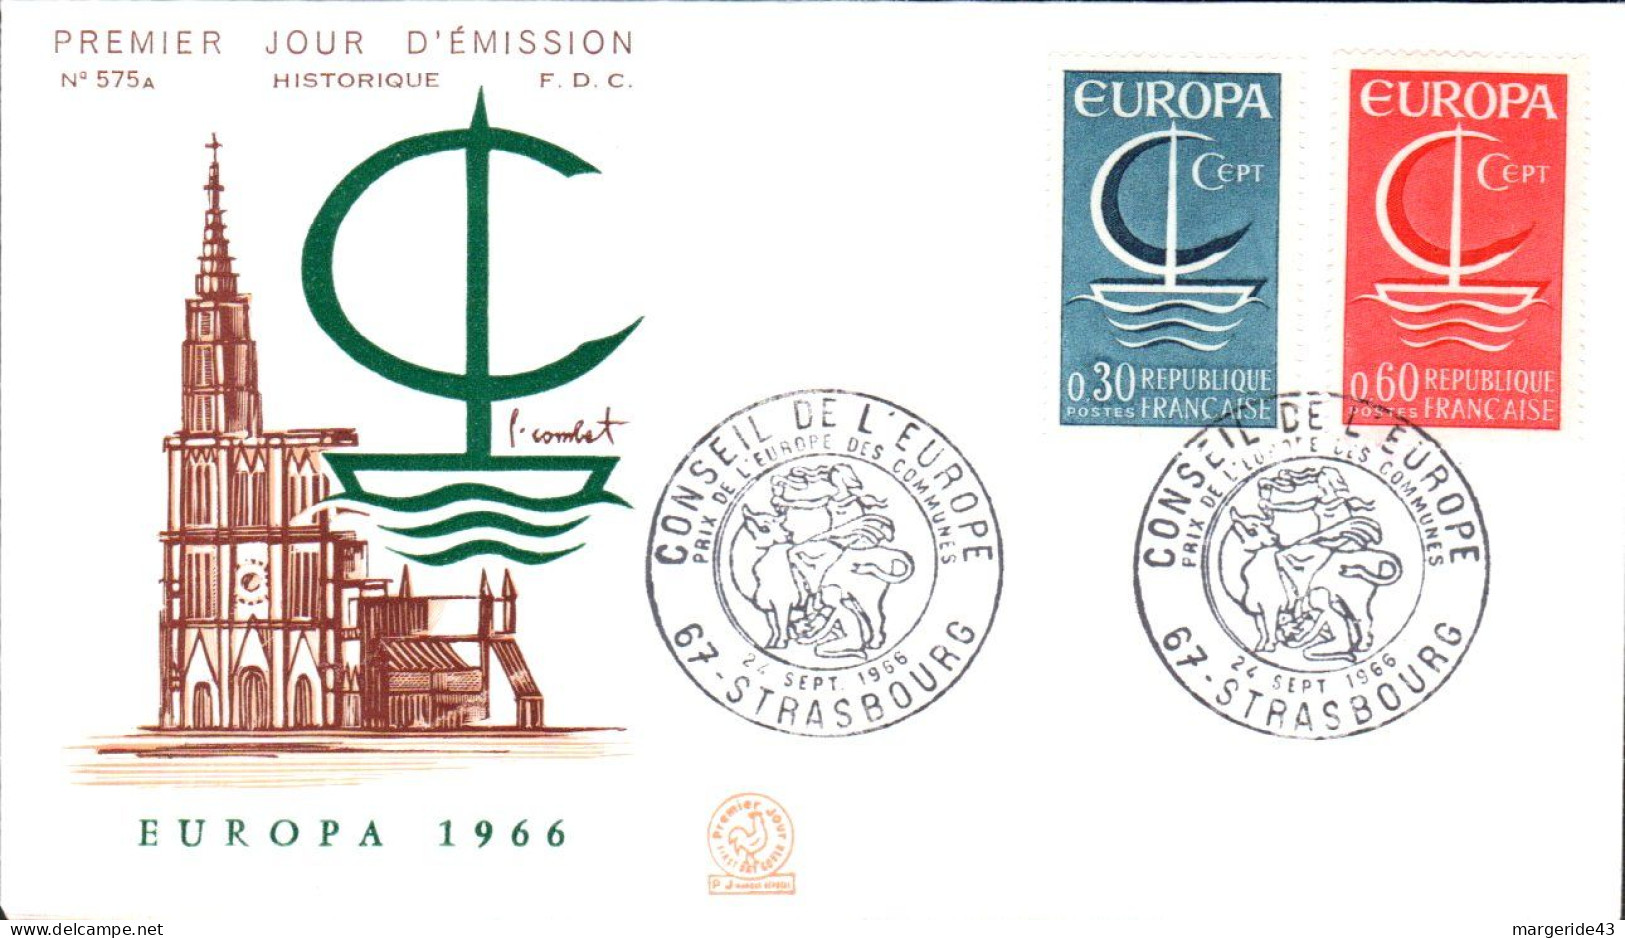 EUROPA 1966 FRANCE FDC - 1966